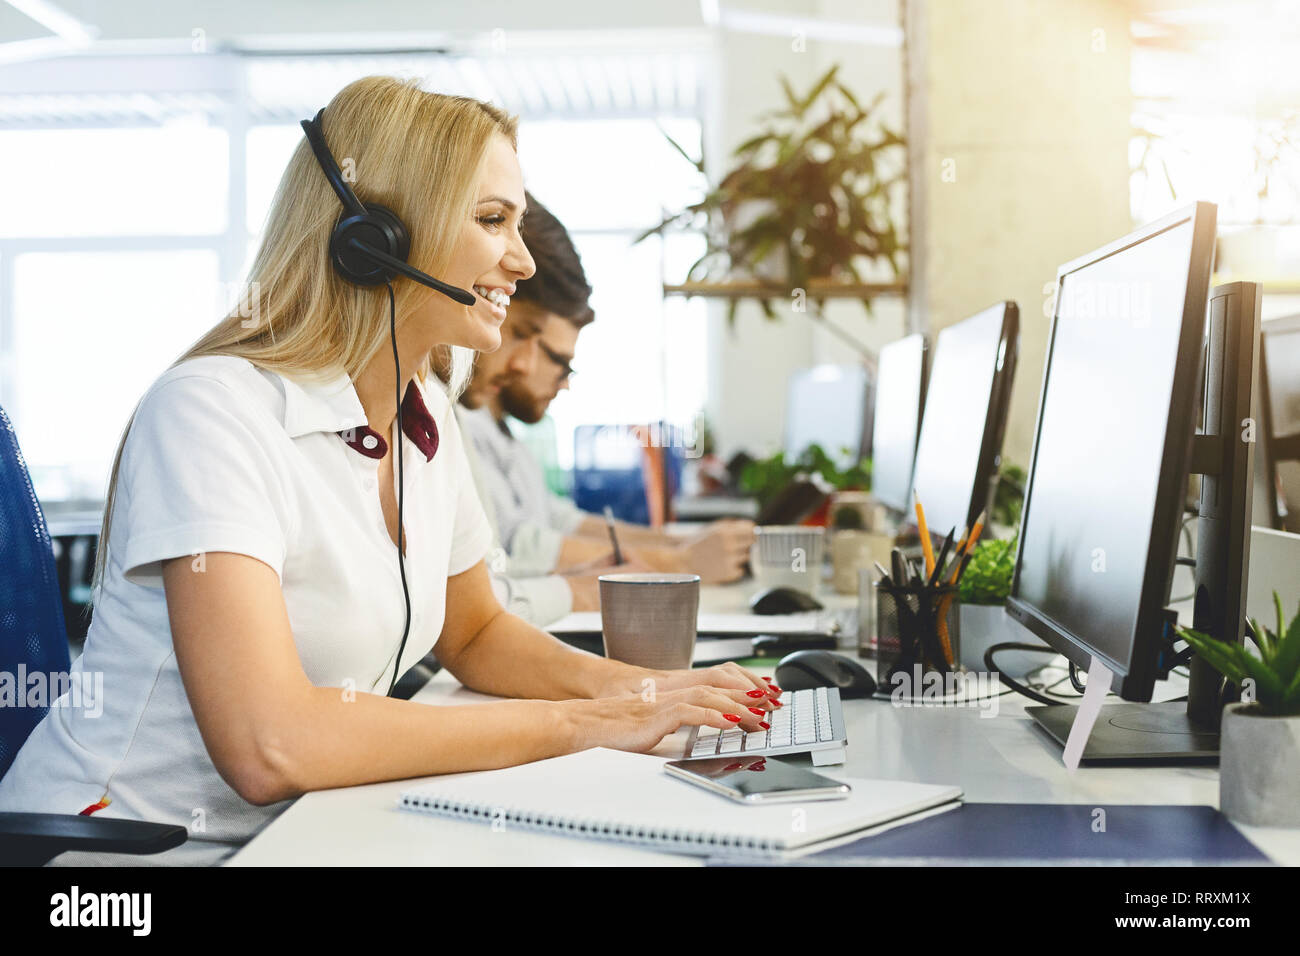 Business woman working at call center office Stock Photo